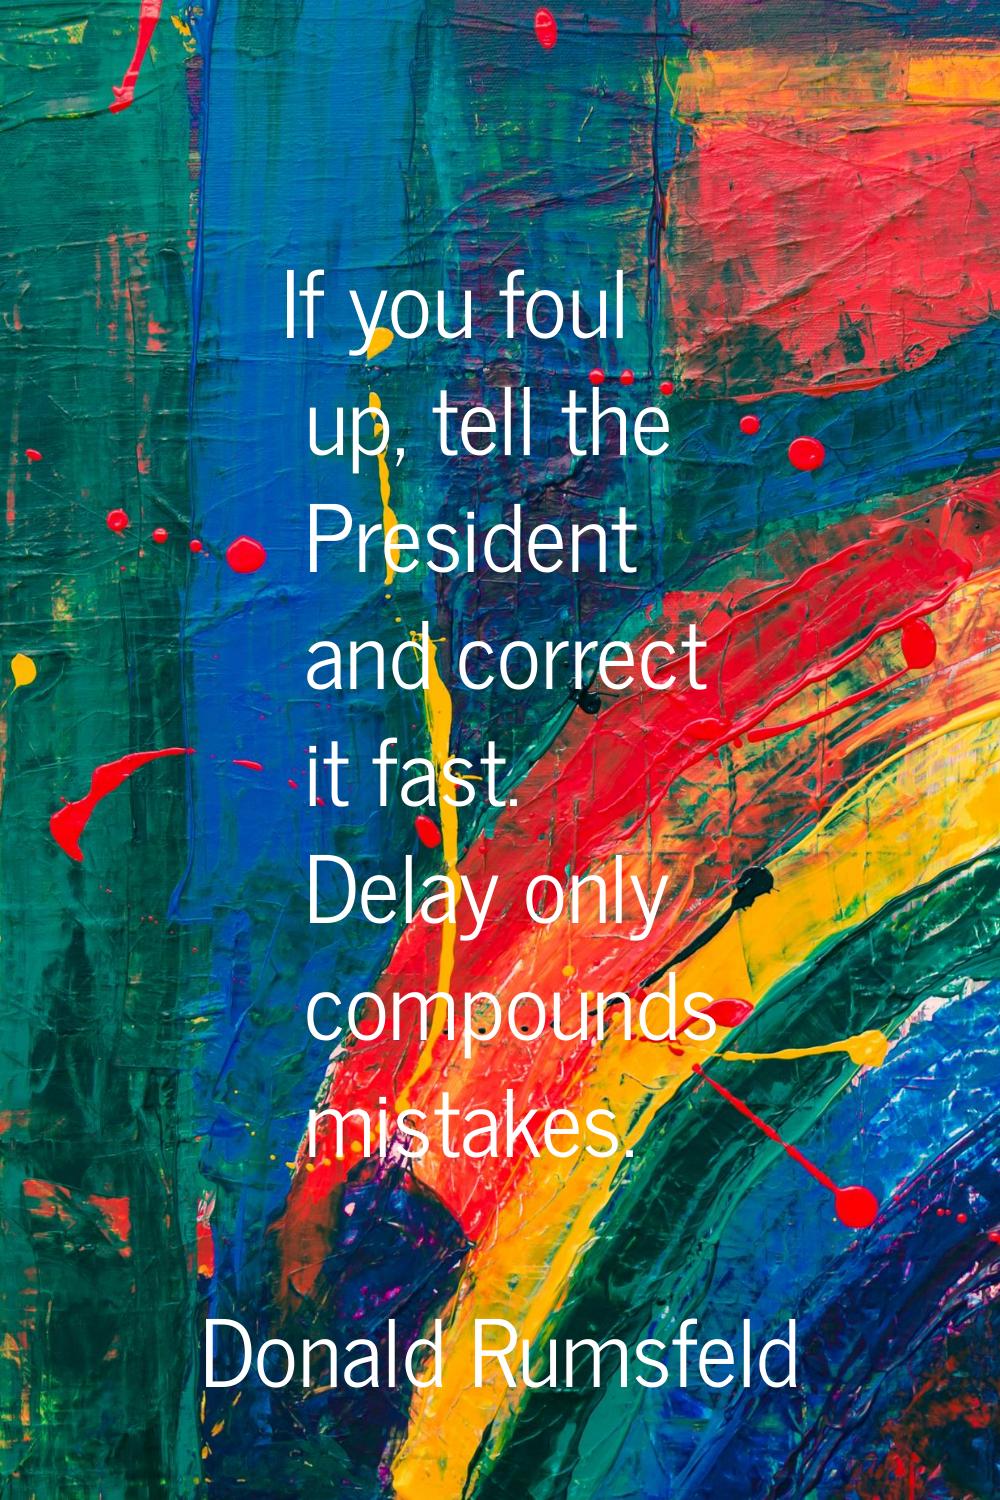 If you foul up, tell the President and correct it fast. Delay only compounds mistakes.